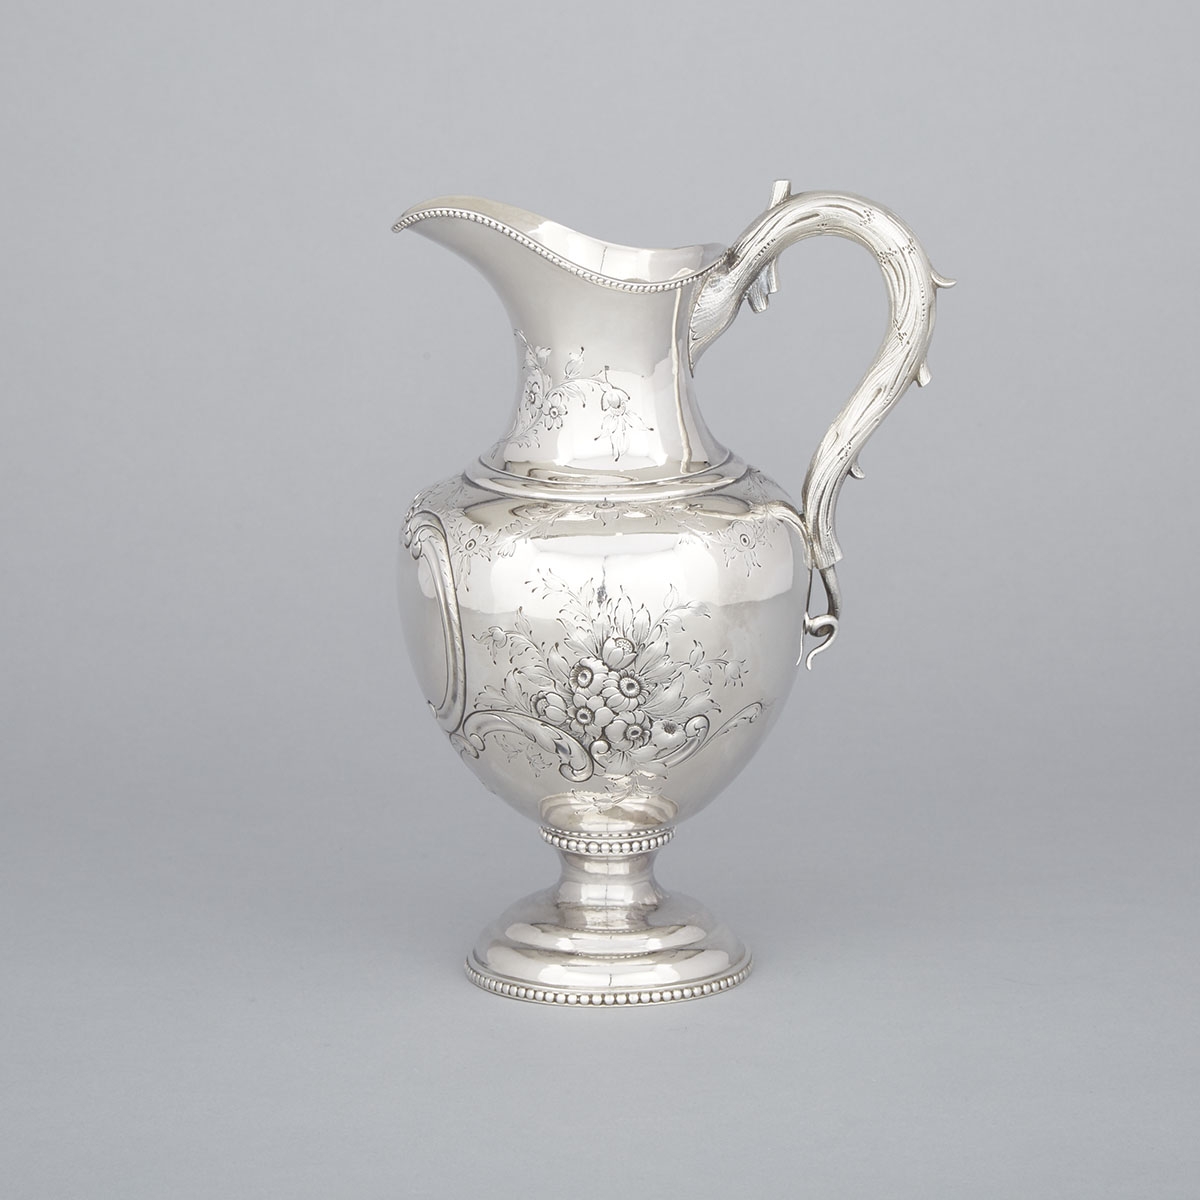 Canadian Silver Ewer, Robert Hendery for Savage & Lyman, Montreal, Que., c.1851-67